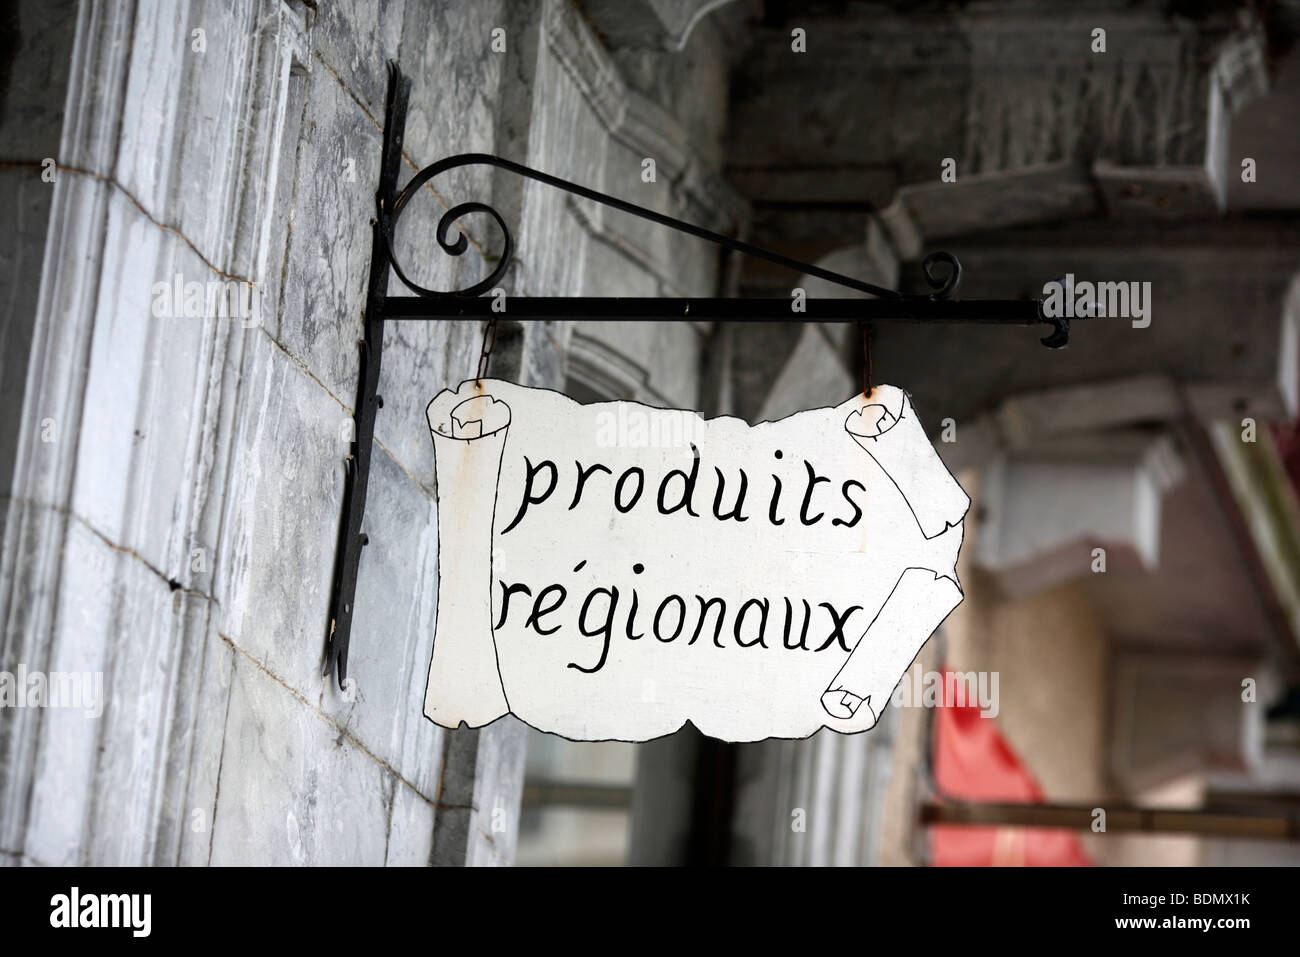 Sign advertising a shop selling regional products or produits regionaux in France Stock Photo